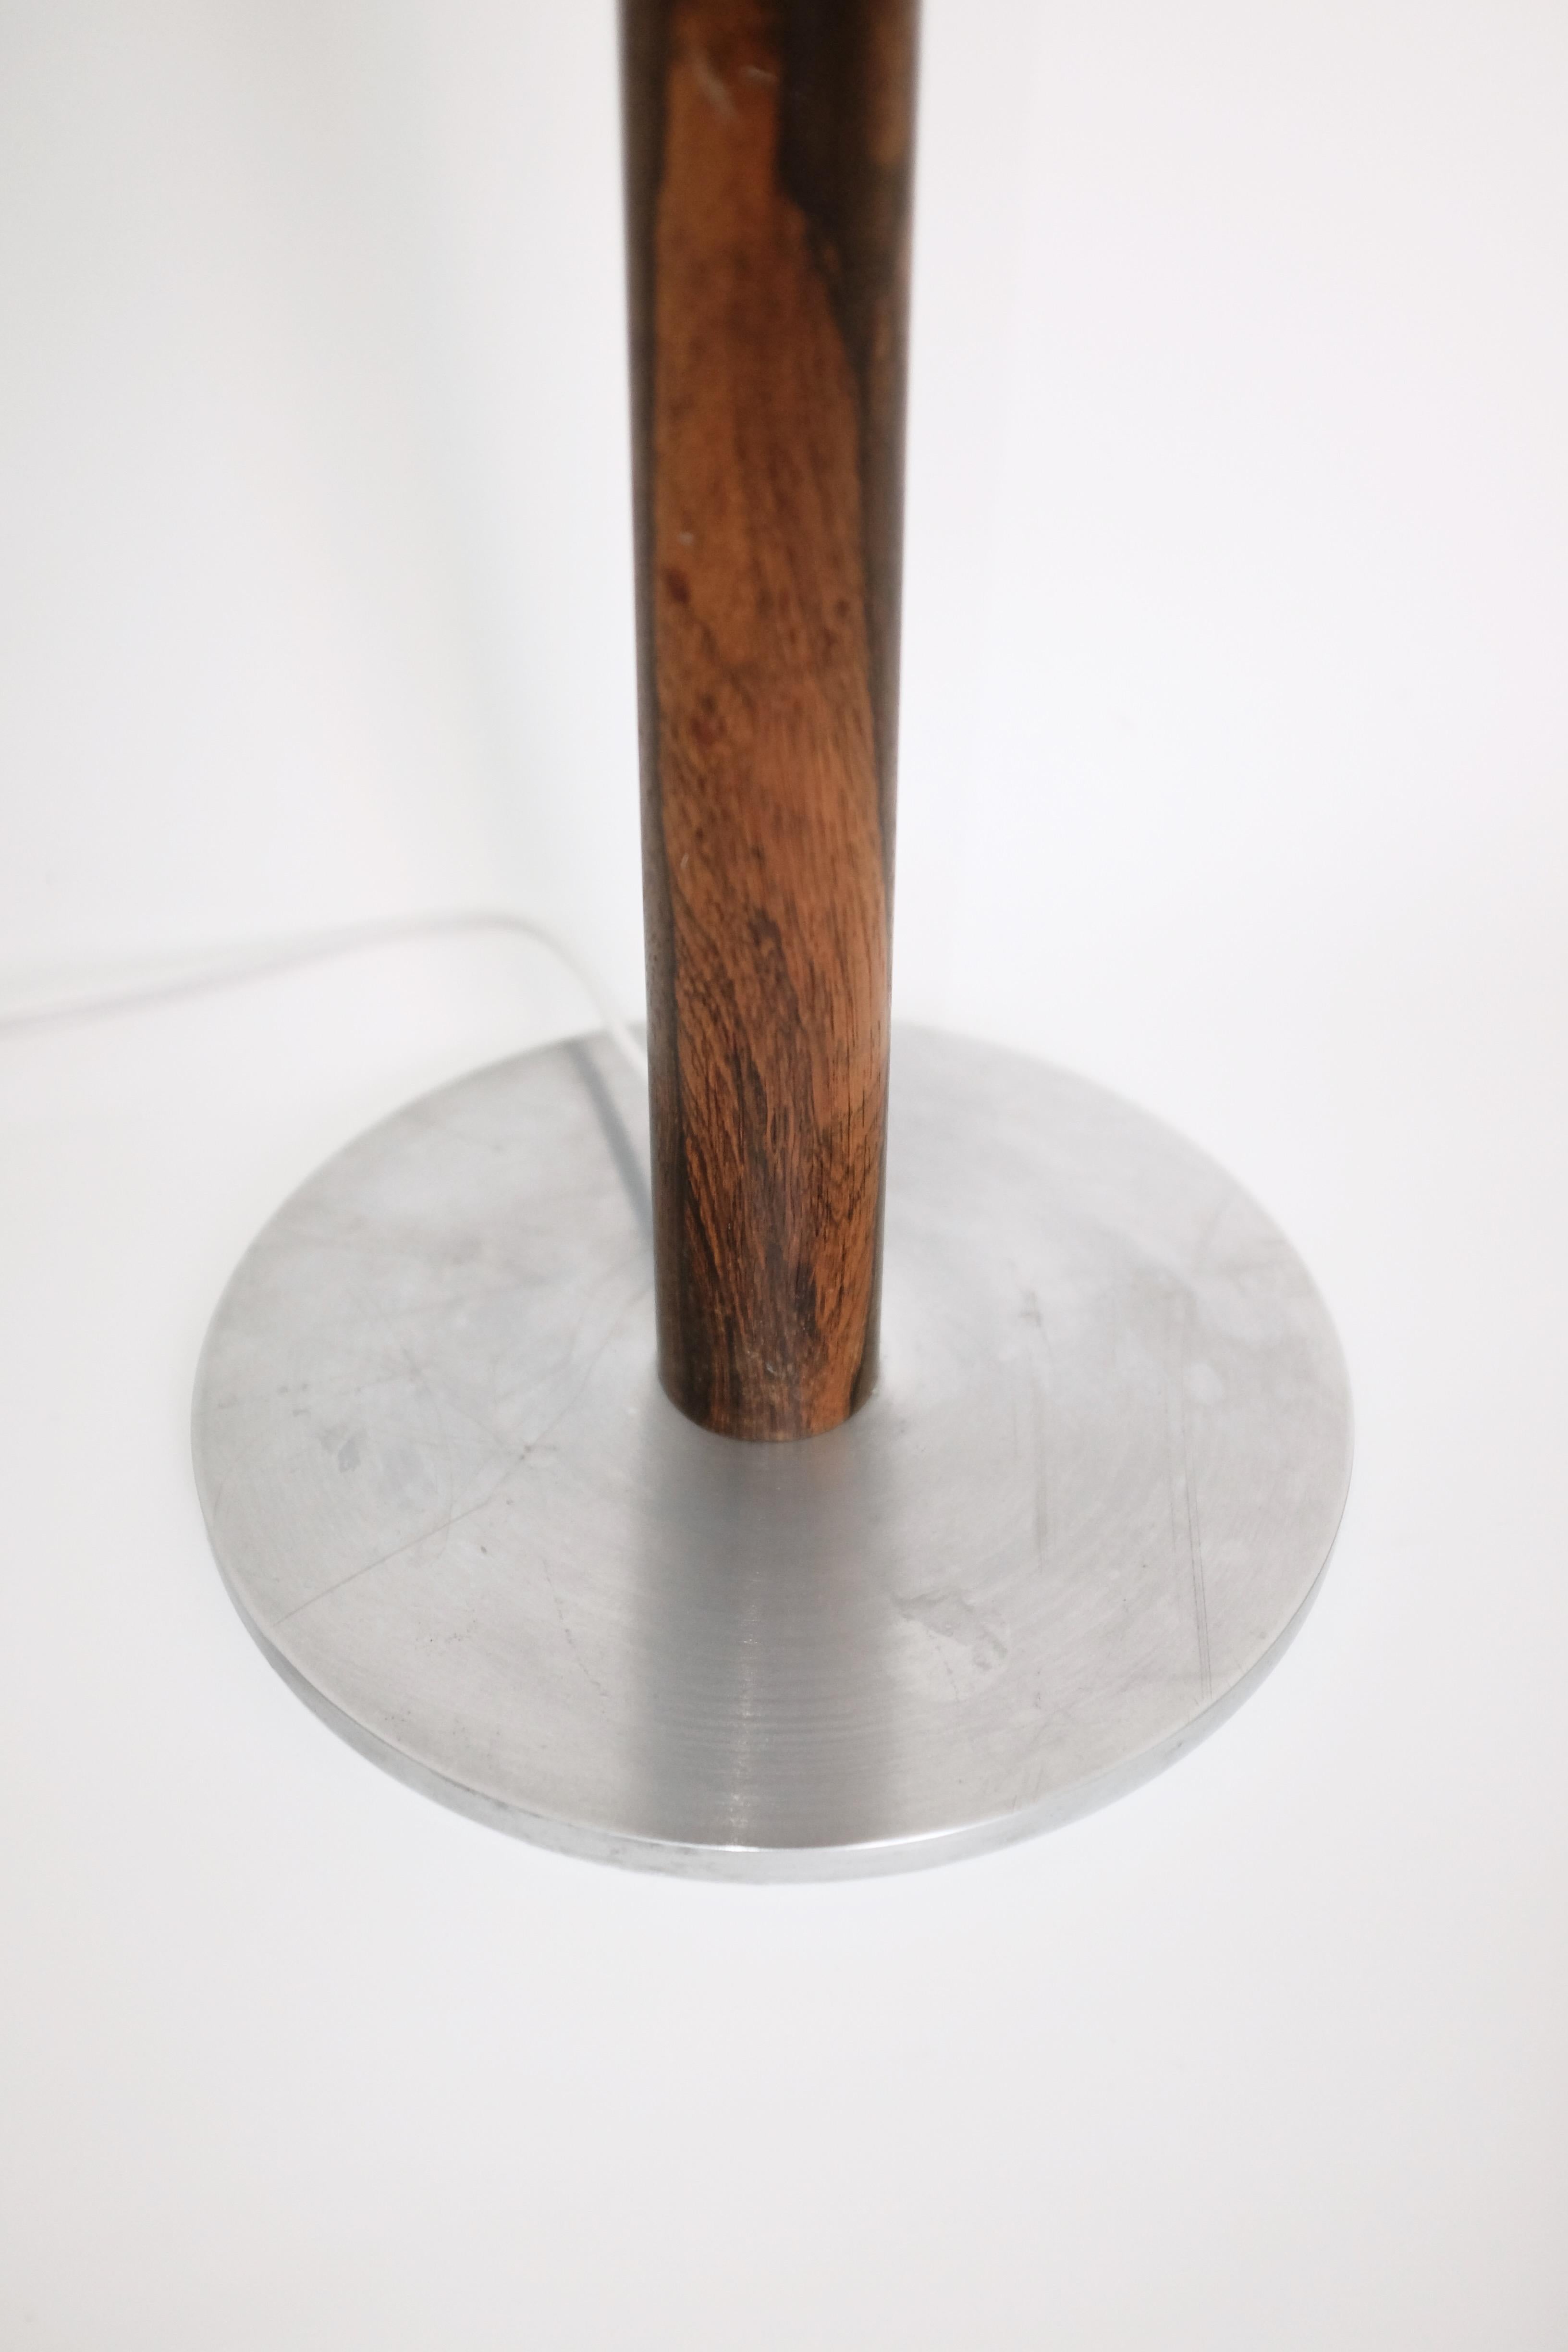 Stunning 1960's floorlamp by Uno & Östen Kristiansson for Luxus, Sweden. Made of a brushed steel base and wooden arm with a new black linen lampshade. Makers label still attached. Overall in a very good condition with age appropriate wear to the